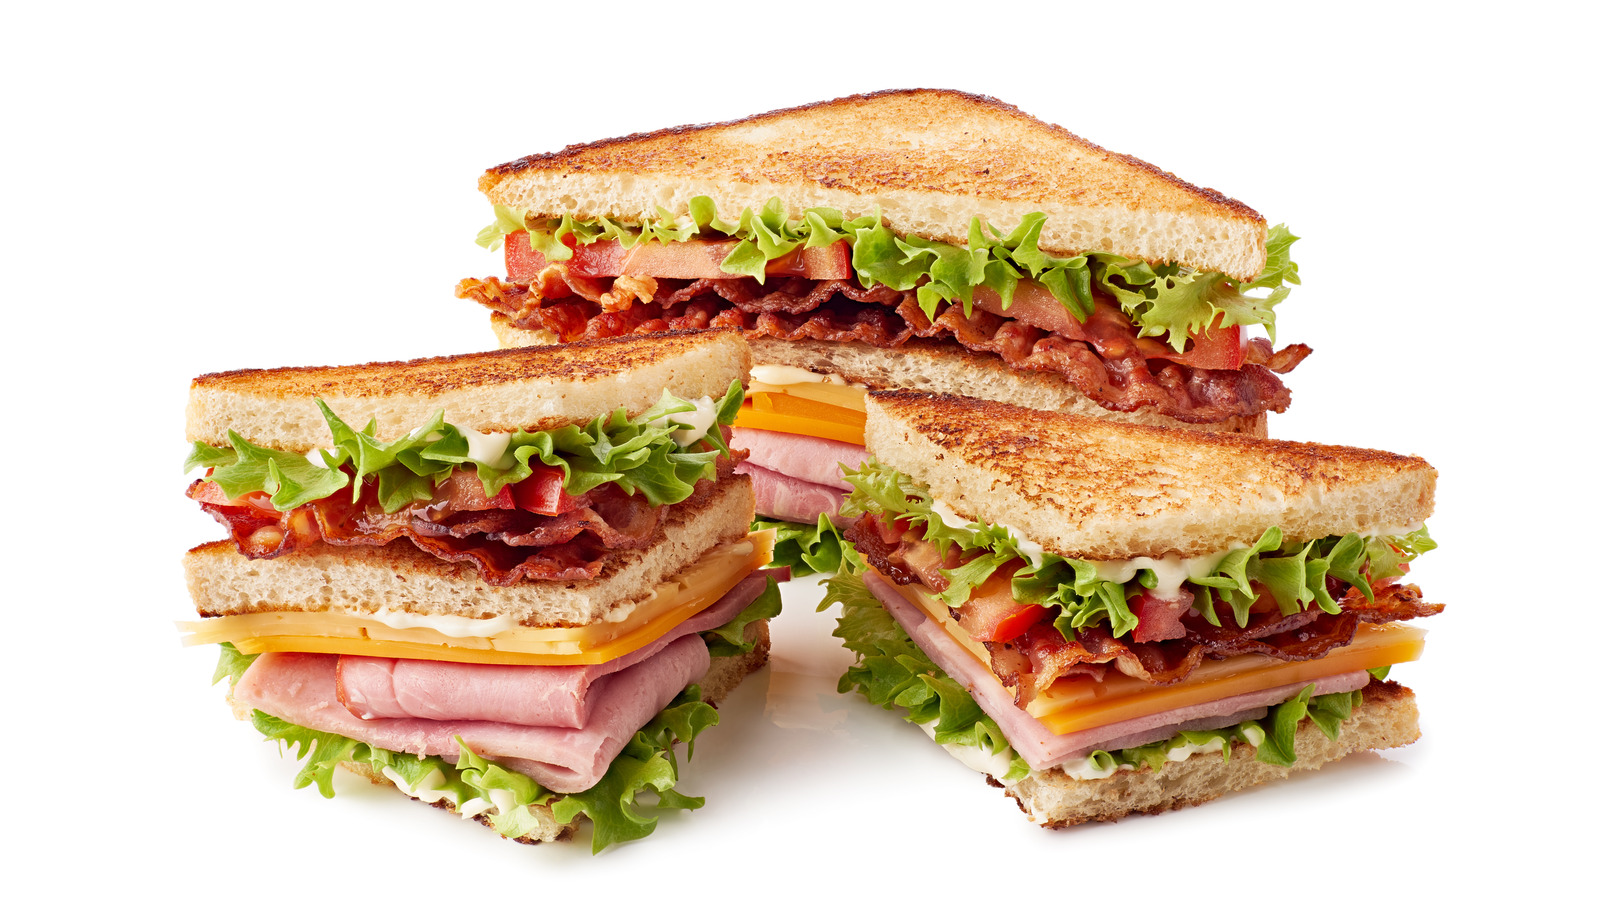 What Does The 'Club' In Club Sandwich Really Mean?